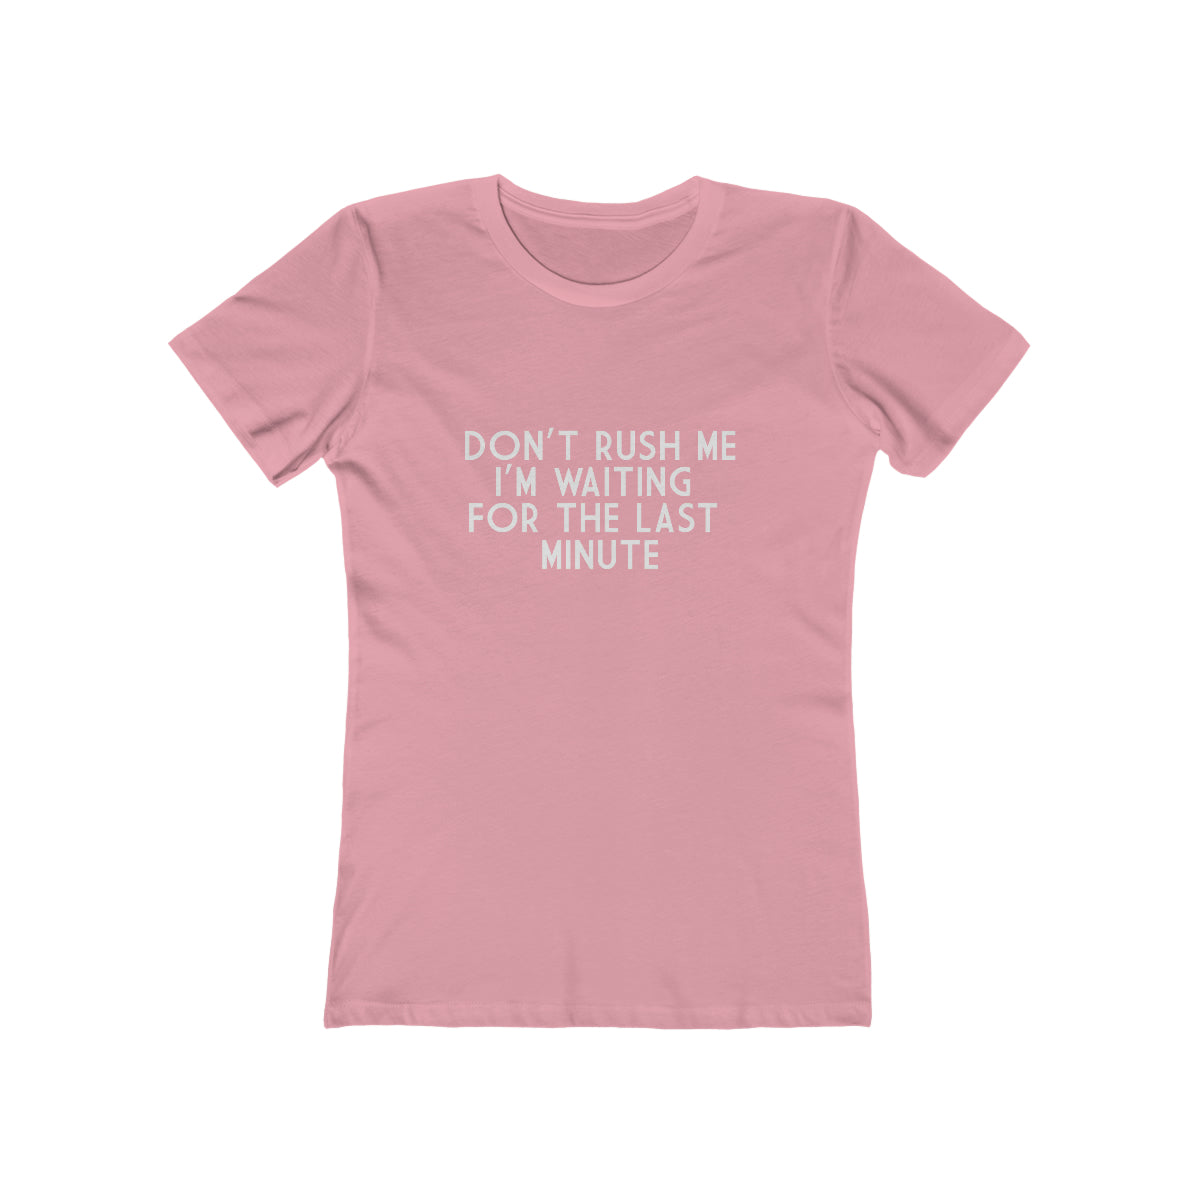 Don't Rush Me I'm Waiting For The Last Minute - Women's T-shirt